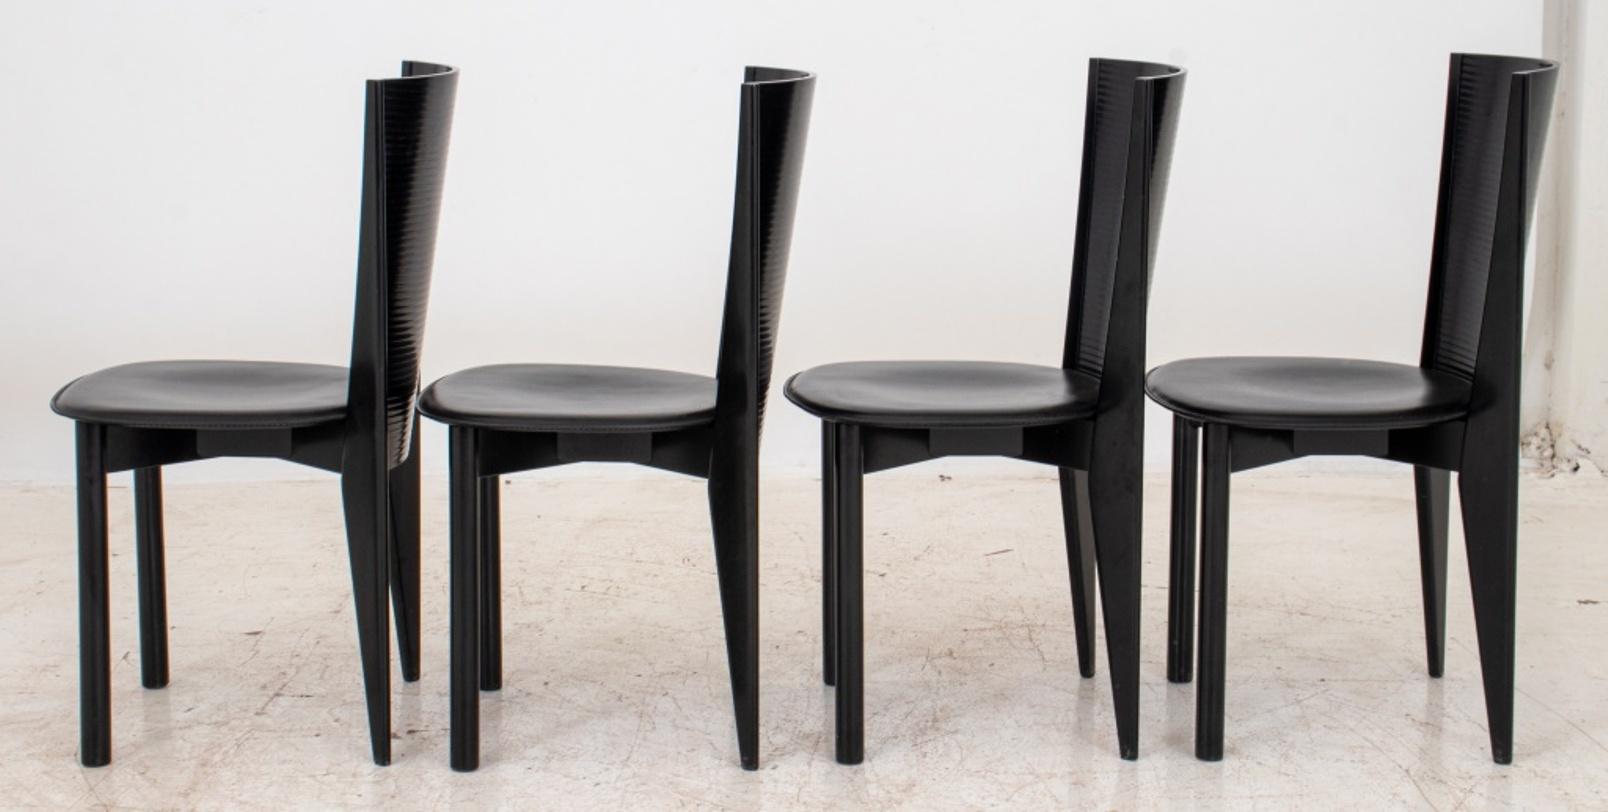 Set of four Italian Post-Modern Calligaris black lacquered and leather dining chairs. Measures: 34.25